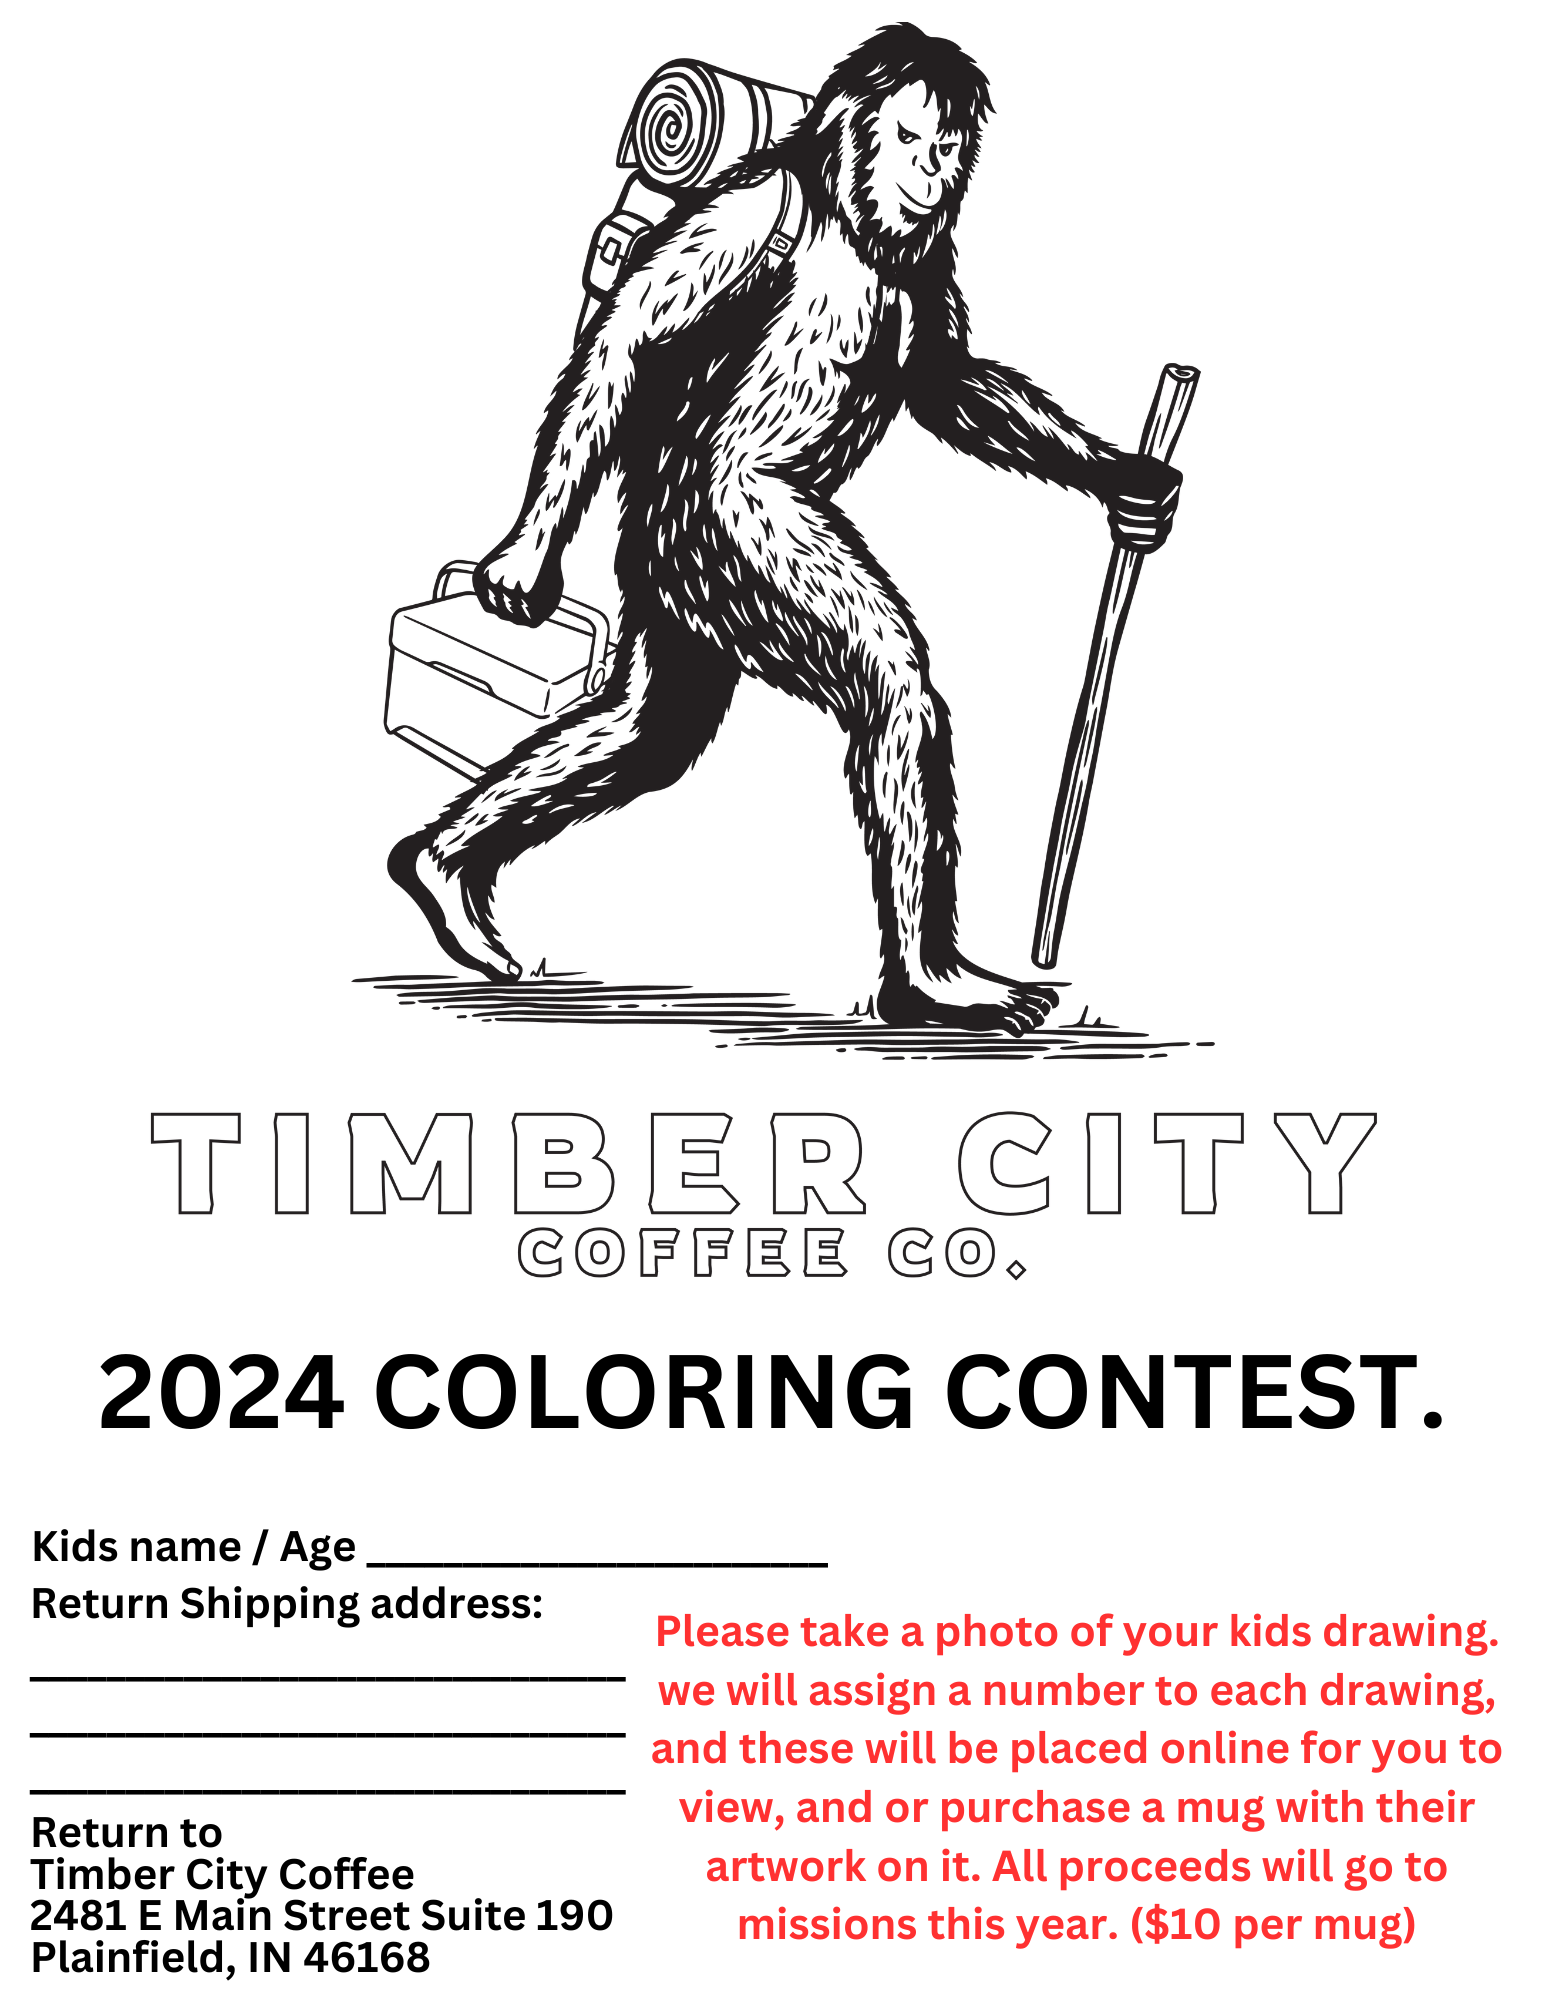 2024 Coloring Contest